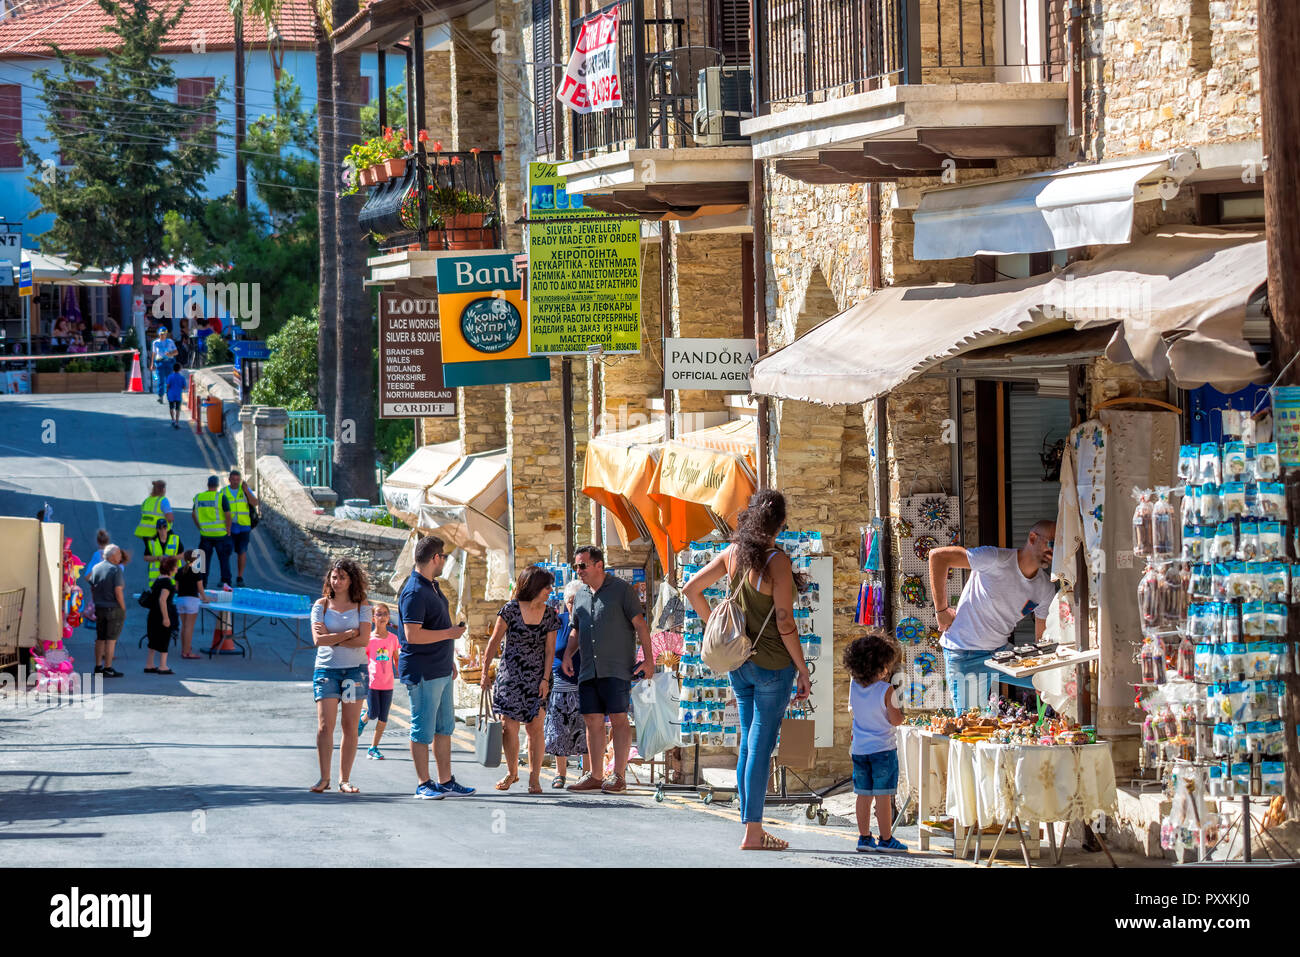 PANO LEFKARA, CYPRUS - JUNE 17, 2018: Scenic street view with many tourists in Lefkara village. Stock Photo